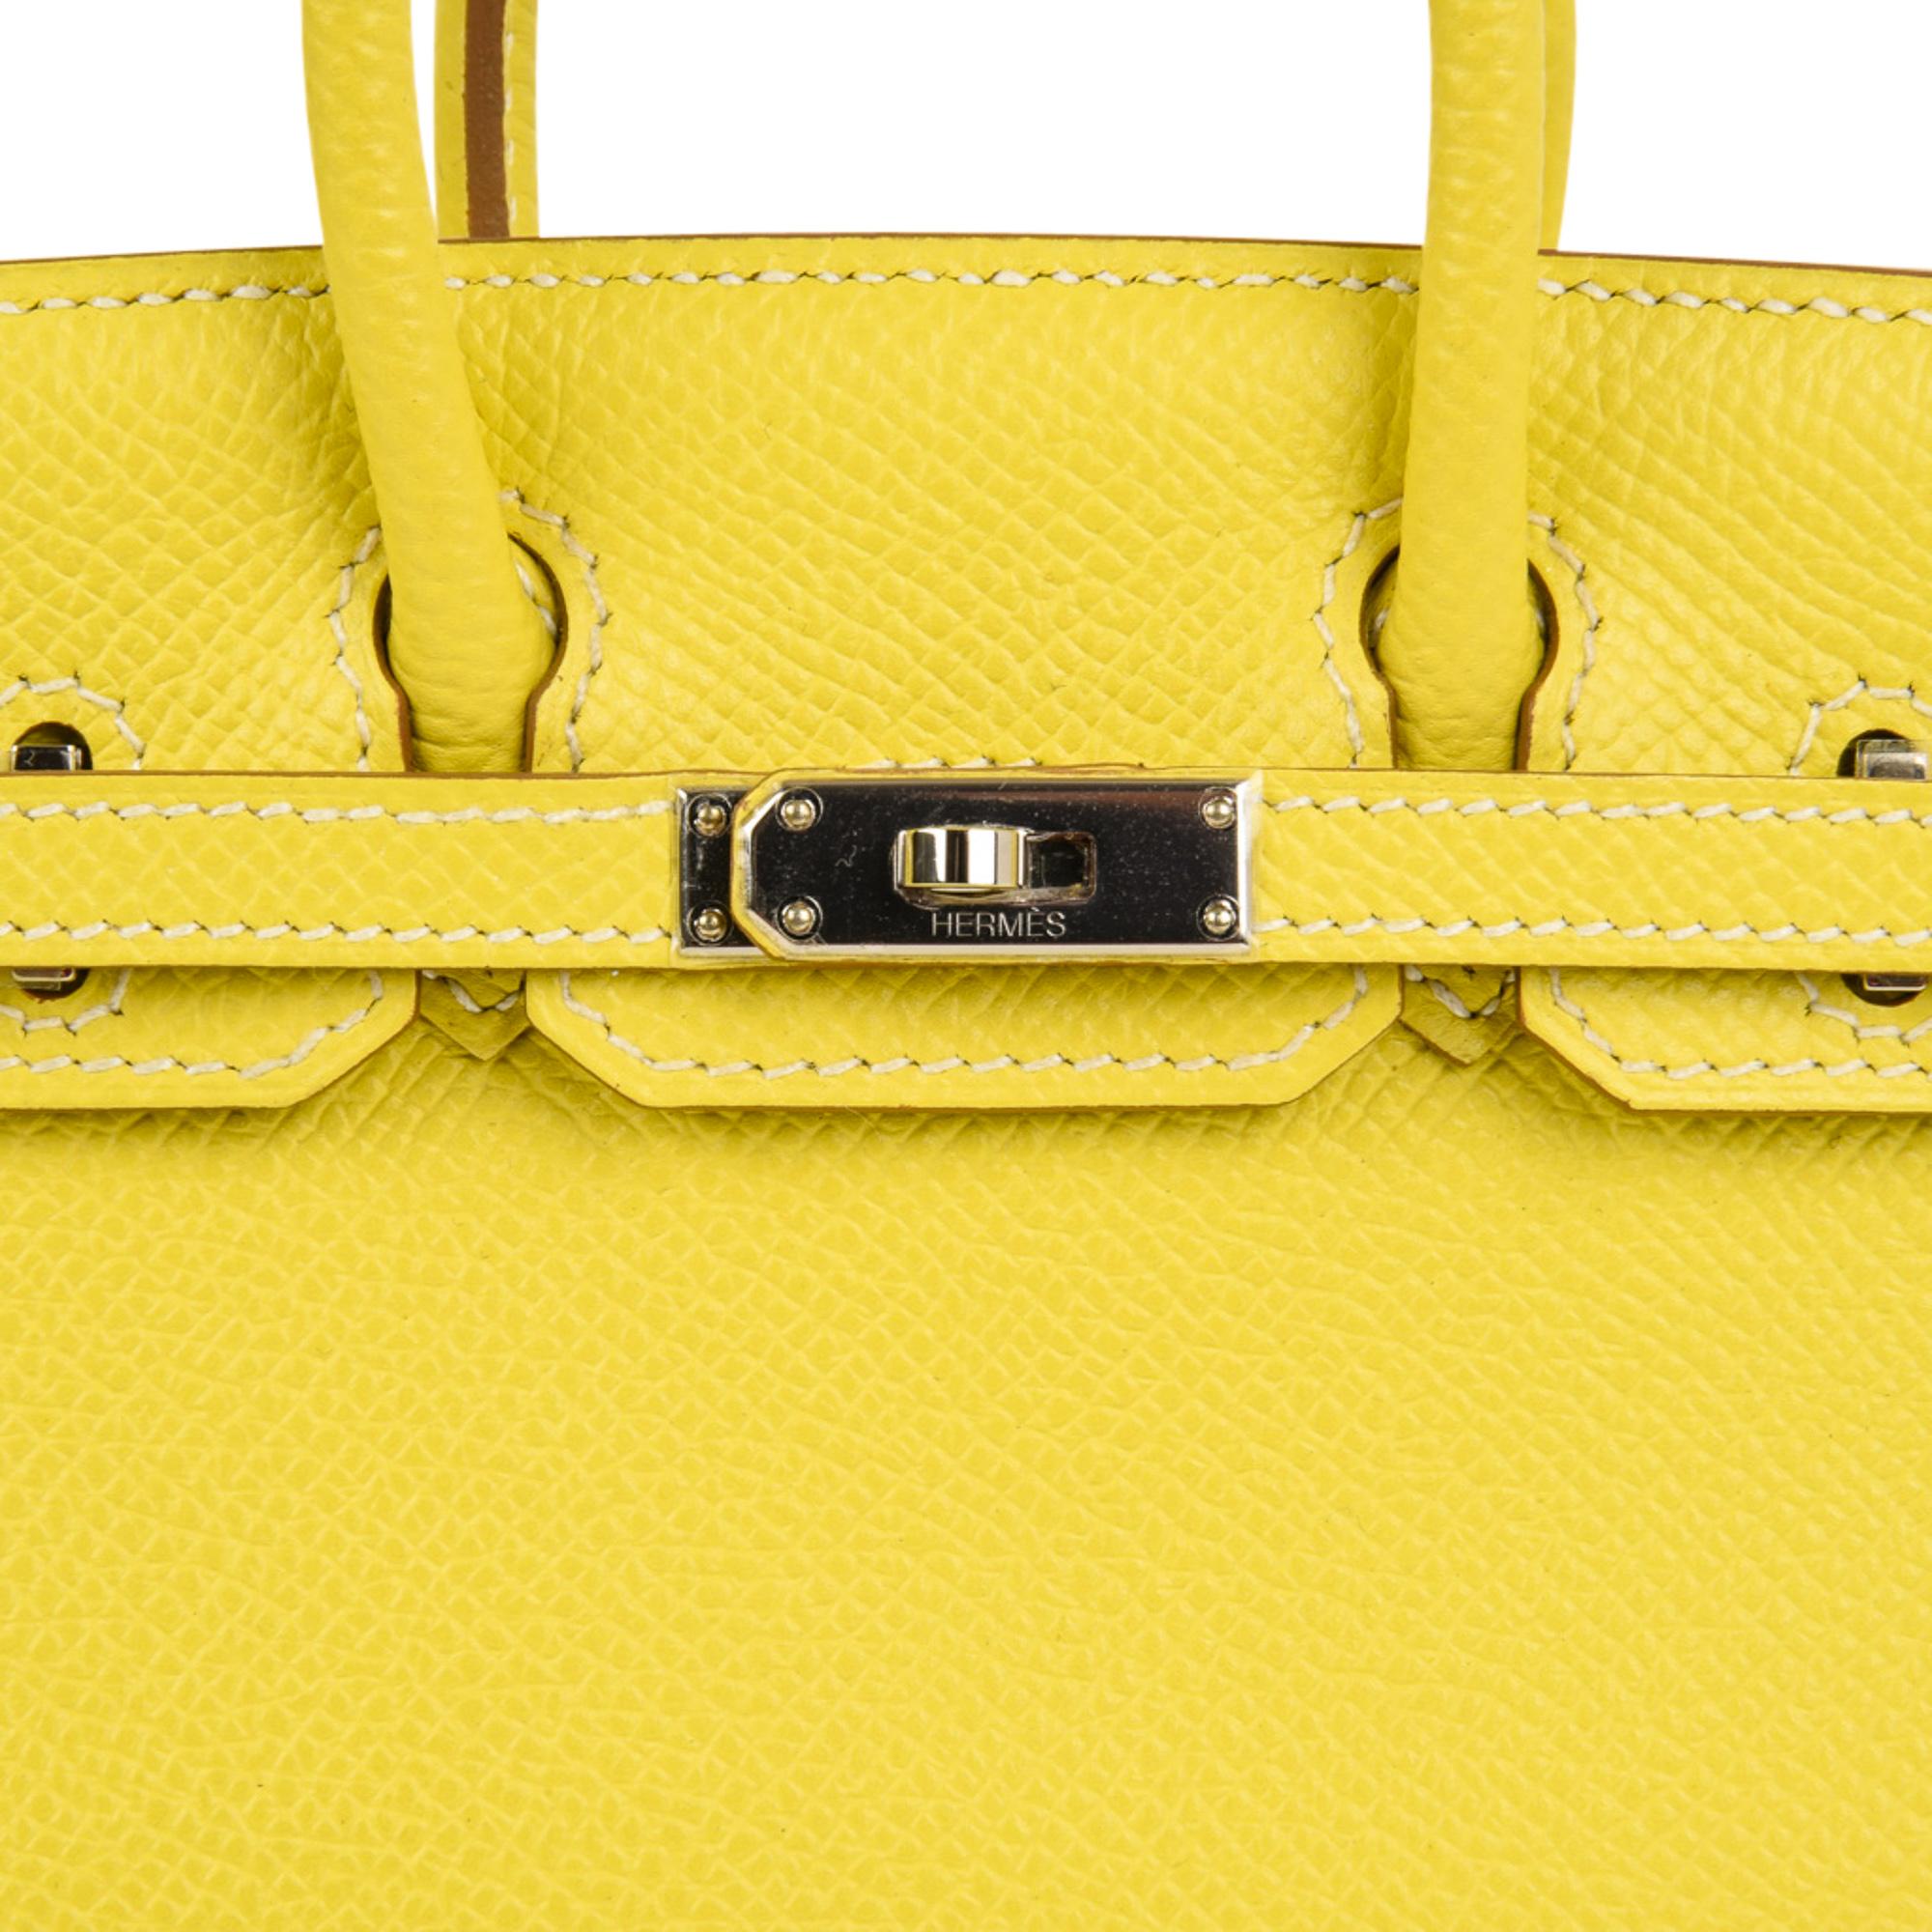 Guaranteed authentic Hermes Tiny Miniature Birkin Limited Edition.
Lively Lime epsom leather with palladium hardware.
Worn as wristlet, shoulder bag, top handle or draped on on larger sized bag.
Comes with detachable shoulder strap, sleepers and